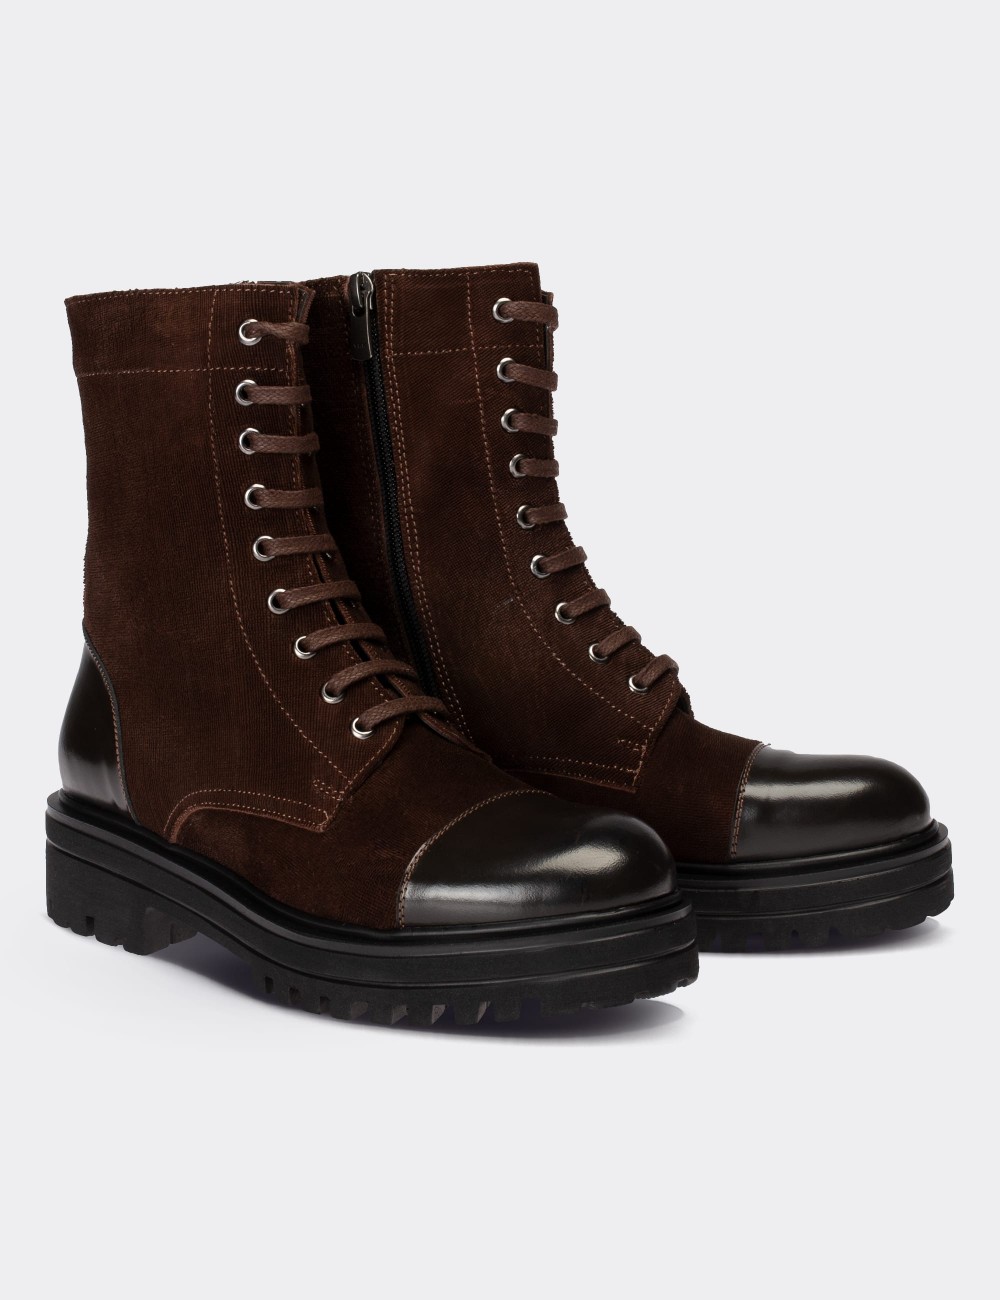 Brown Suede Leather Postal Boots - 01802ZKHVE01